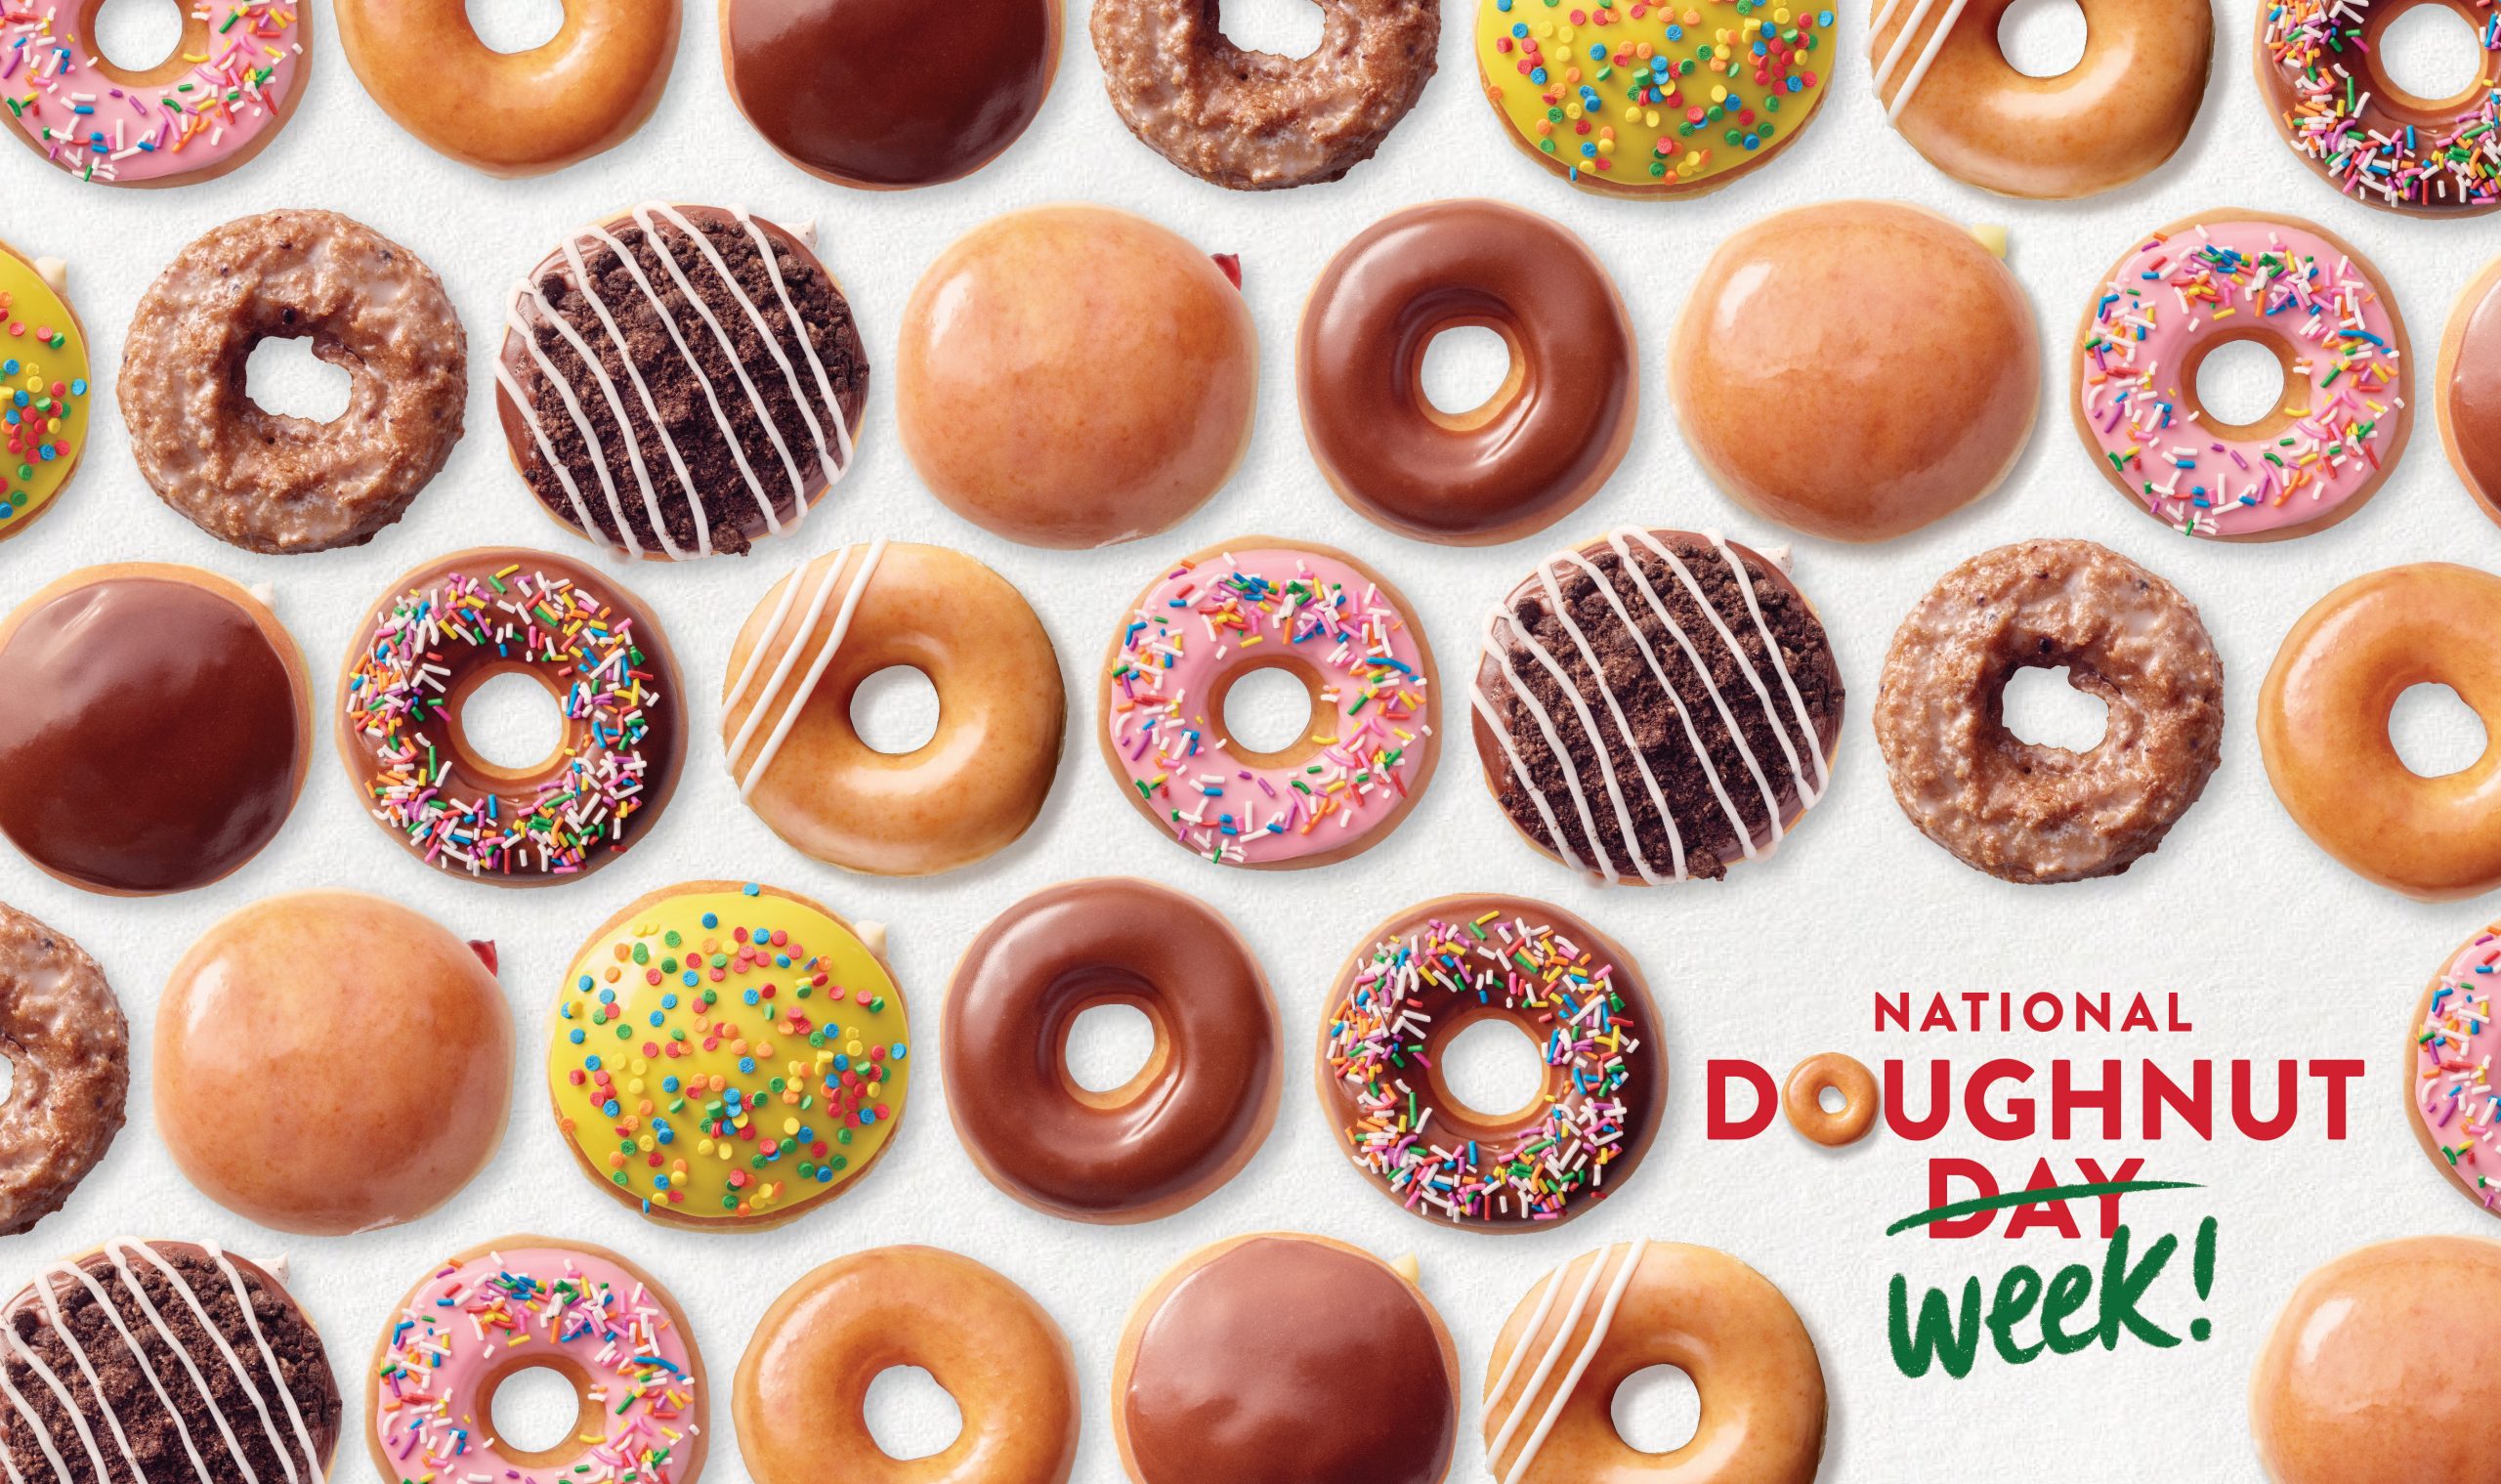 Krispy Kreme extends National Doughnut Day to National Doughnut Week, offering fans any doughnut of choice for FREE, no purchase necessary, June 1 through June 5